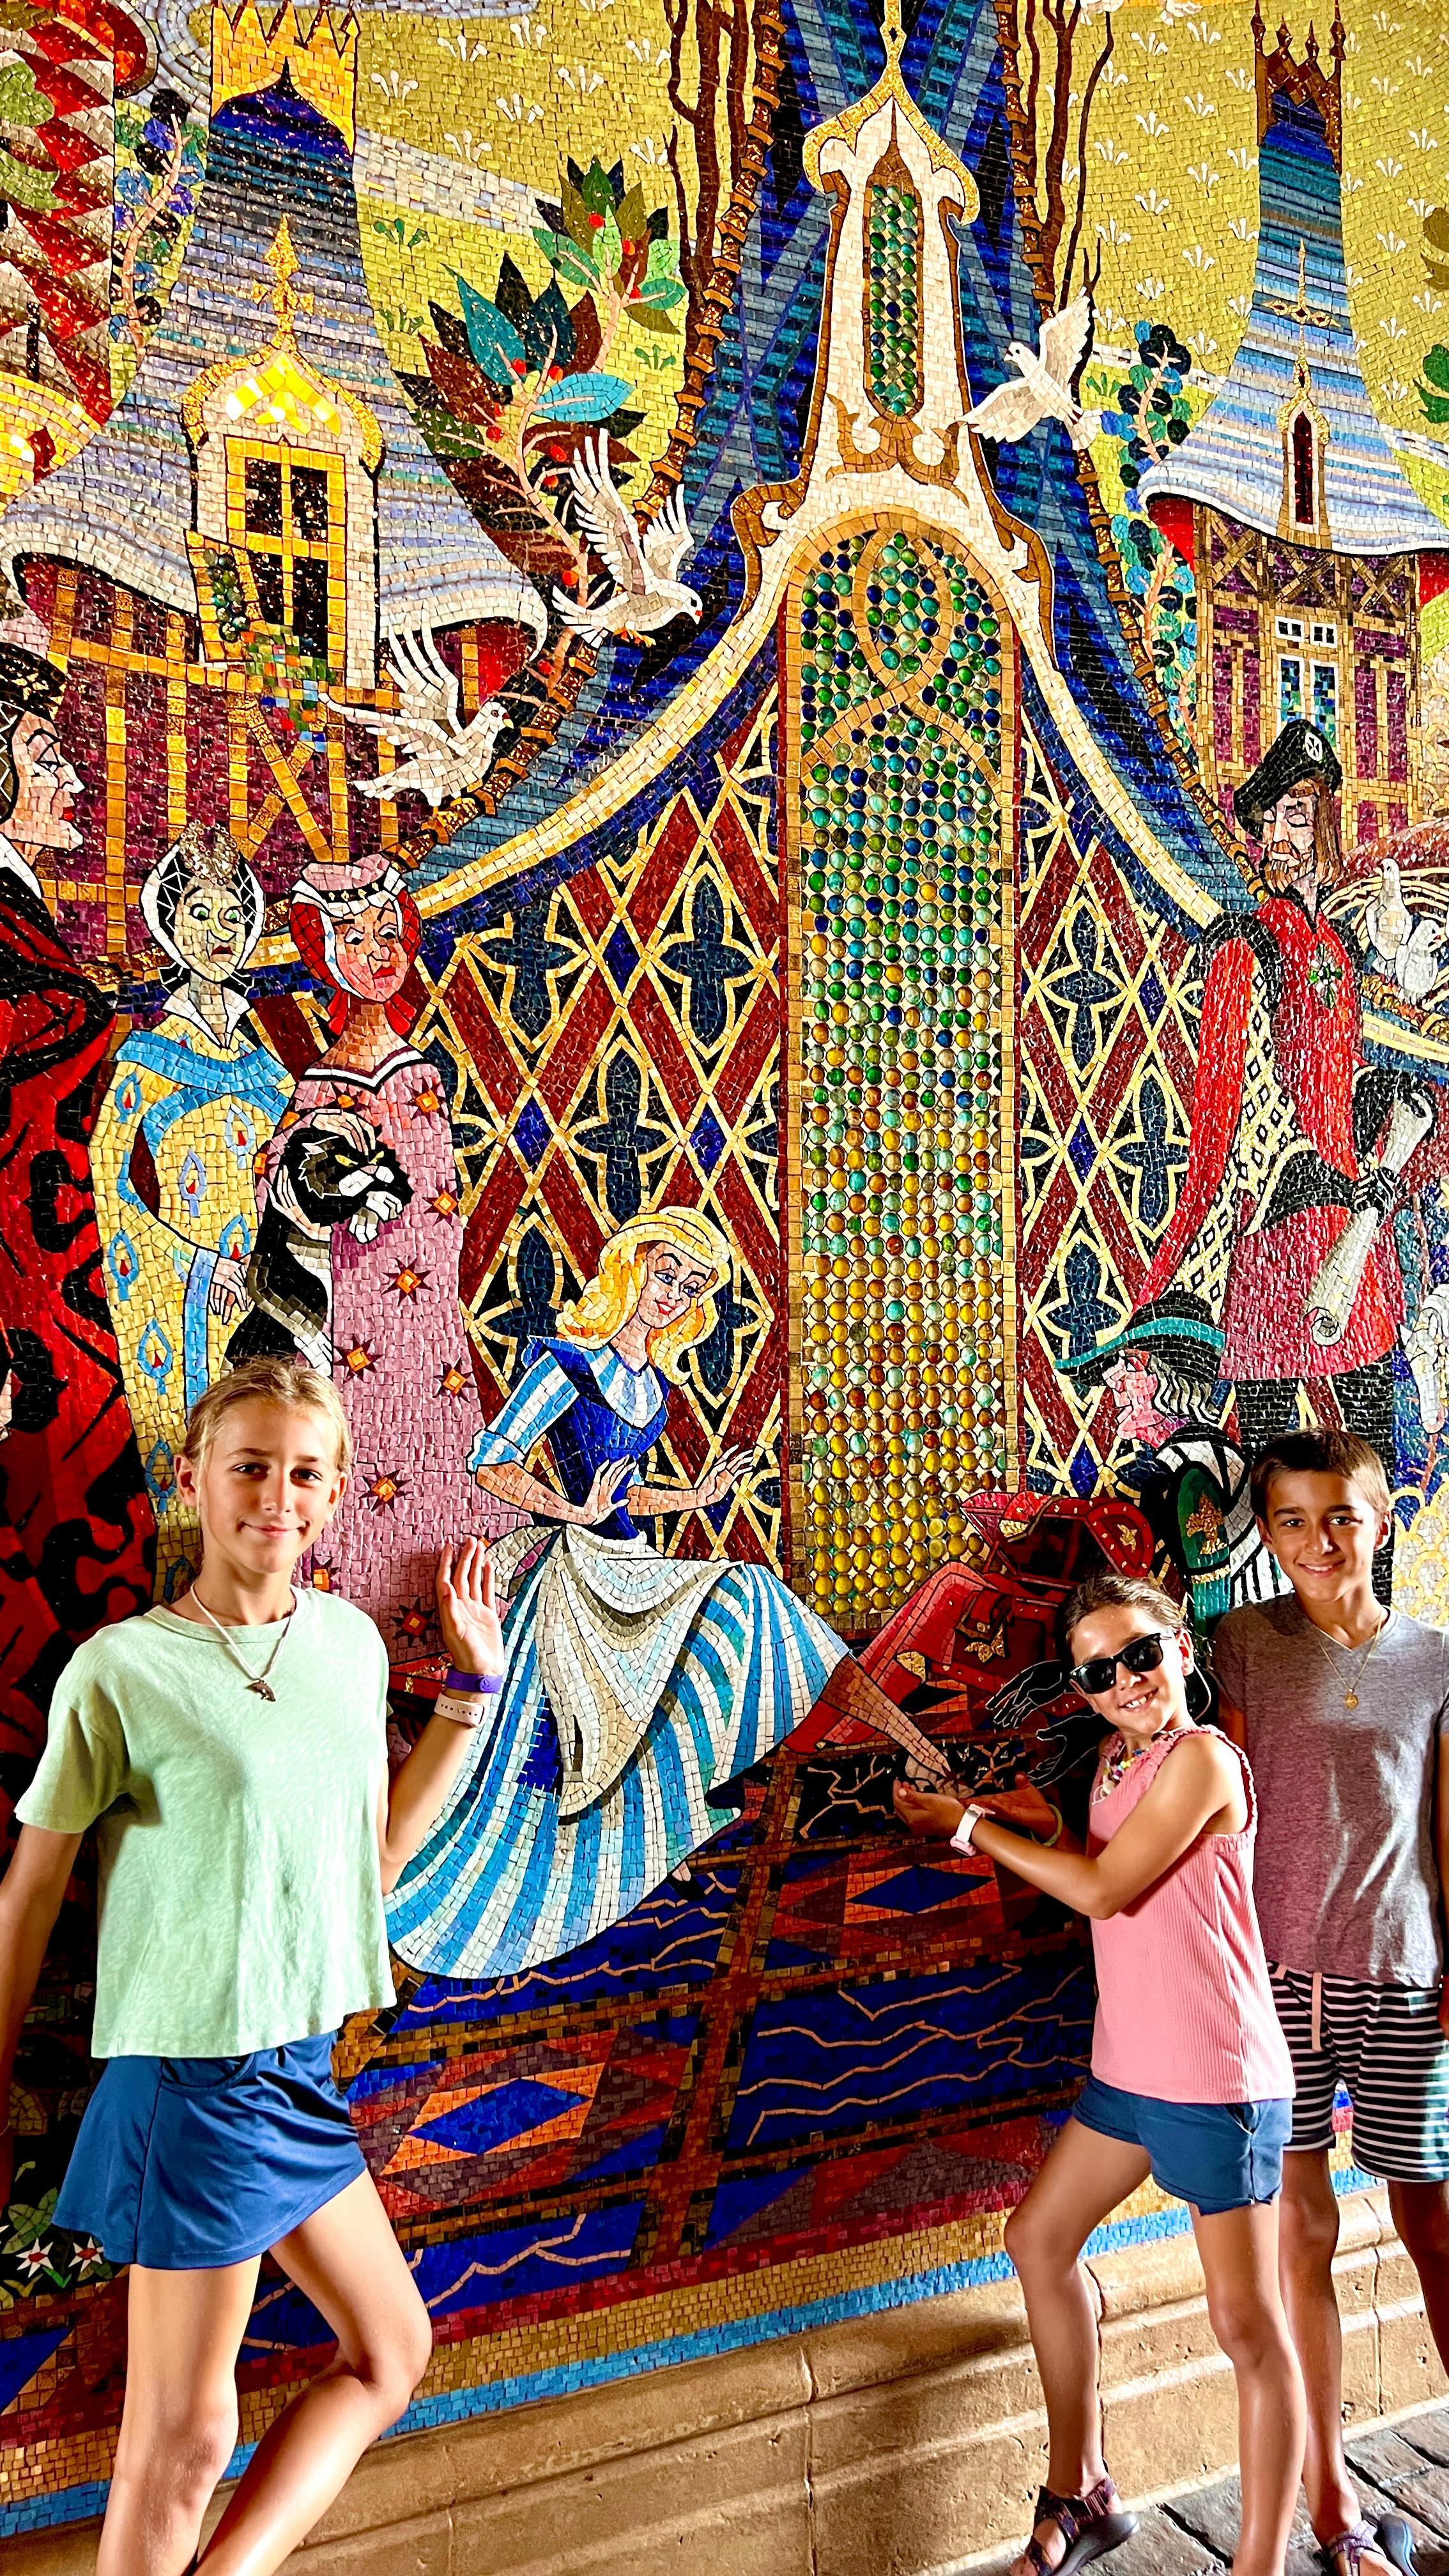 𝐒𝐡𝐚𝐫𝐞 𝐲𝐨𝐮𝐫 𝐃𝐢𝐬𝐧𝐞𝐲 𝐭𝐢𝐩! ⁣
⁣
Did you know you can walk through Cinderella’s castle and take photos of some of the most incredible Disney mosaics? ⁣
⁣
𝘋𝘪𝘥 𝘺𝘰𝘶 𝘬𝘯𝘰𝘸 𝘸𝘩𝘦𝘳𝘦 𝘦𝘭𝘴𝘦 𝘺𝘰𝘶 𝘤𝘢𝘯 𝘴𝘦𝘦 𝘪𝘮𝘱𝘳𝘦𝘴𝘴𝘪𝘷𝘦 𝘮𝘰𝘴𝘢𝘪𝘤𝘴 𝘢𝘵 𝘋𝘪𝘴𝘯𝘦𝘺 𝘞𝘰𝘳𝘭𝘥? ⁣
⁣
#cinderella #cinderellascastle #disneyworld #disneyworldorlando #wdw #wdw50 #waltdisneyworld #disneytips #disneytipsandtricks #disneycreators @disneyparks #magickingdom #magickingdompark